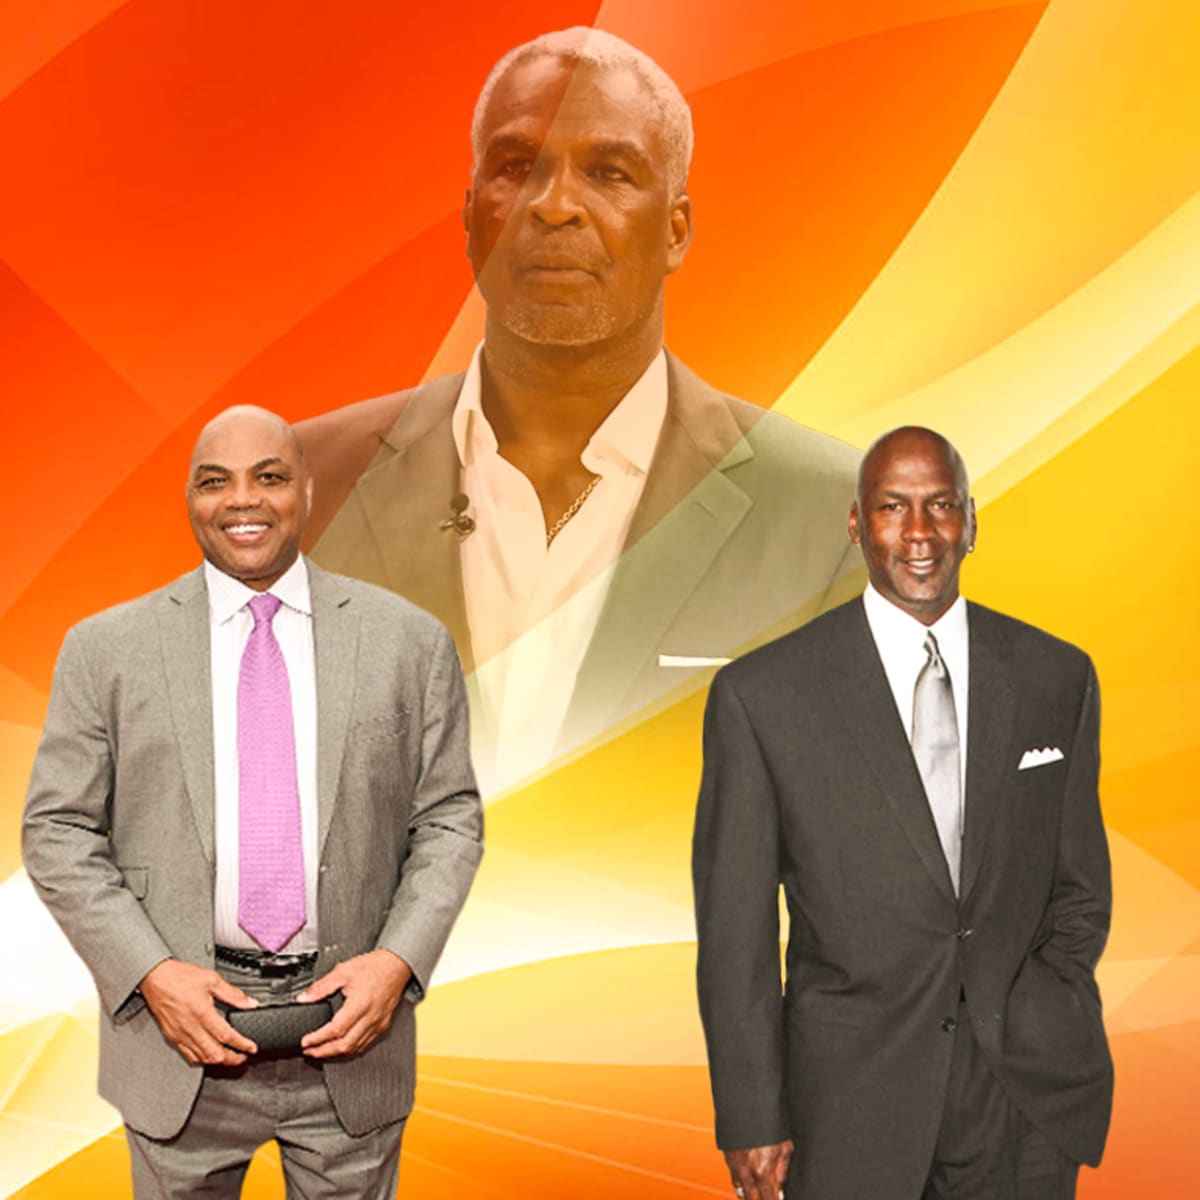 Charles Oakley Michael Jordan And Barkley Will Never Be Friends Again: "He Crossed The Line, He Three Lines, And He Got A Ticket For Every Line He Crossed." - Fadeaway